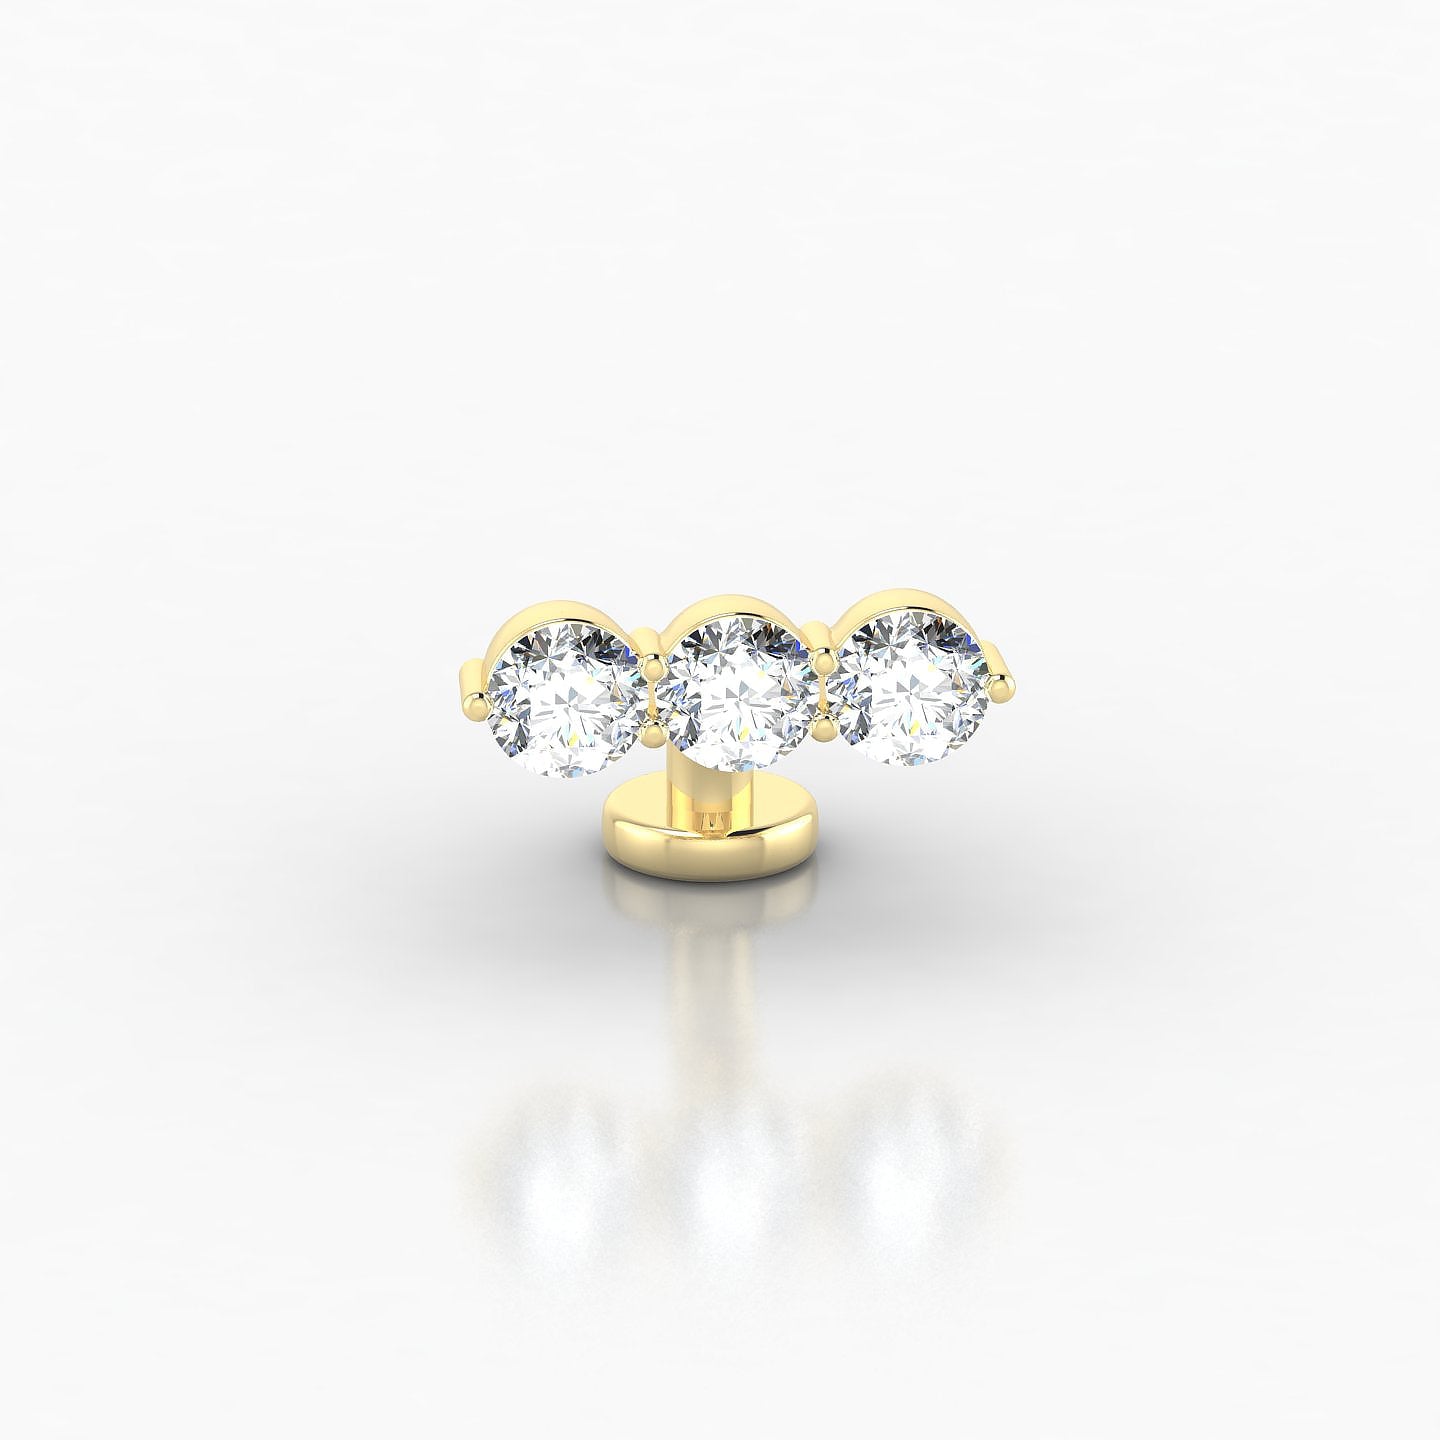 Ma'at | 18k Yellow Gold 6 mm 10 mm Trilogy Diamond Floating Navel Piercing